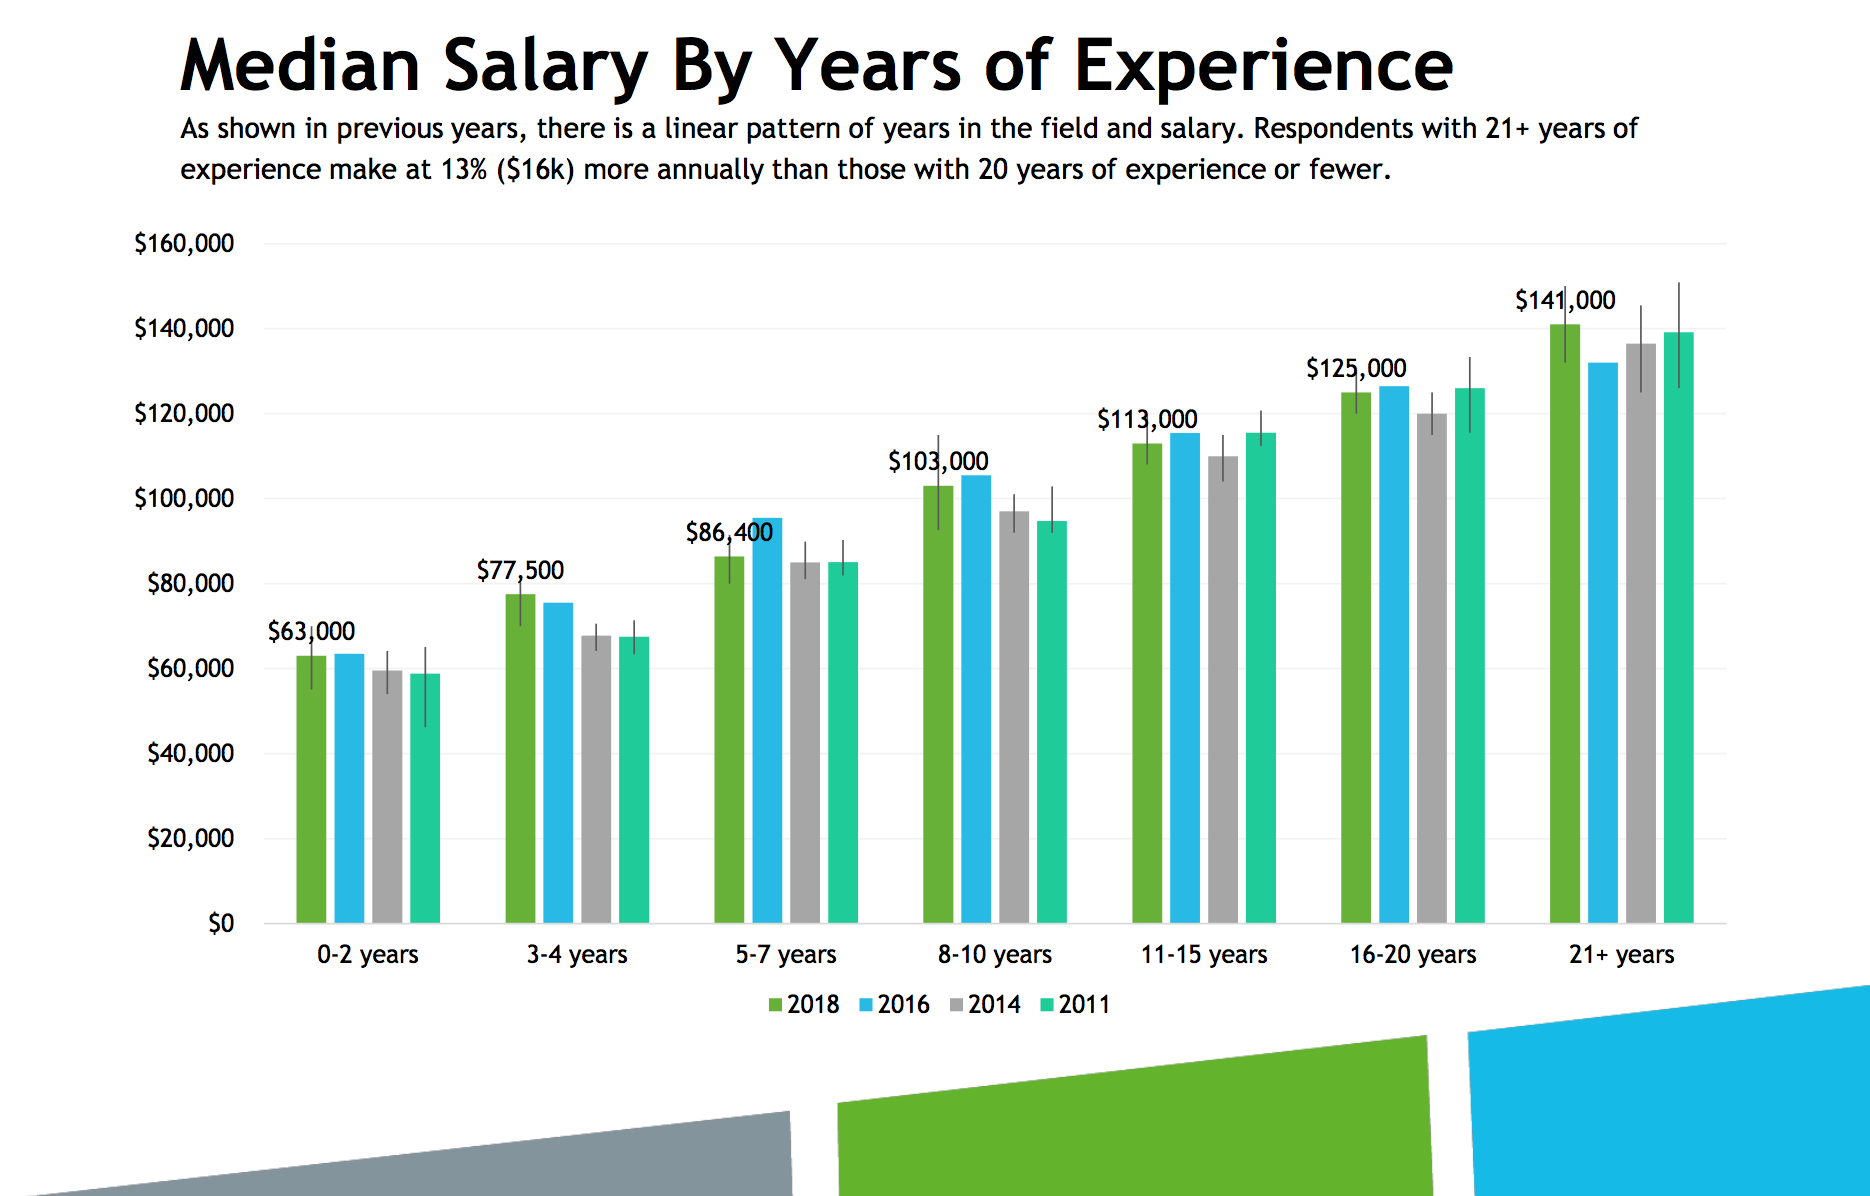 bar graph showing salary by years of experience with comparison to previous surveys